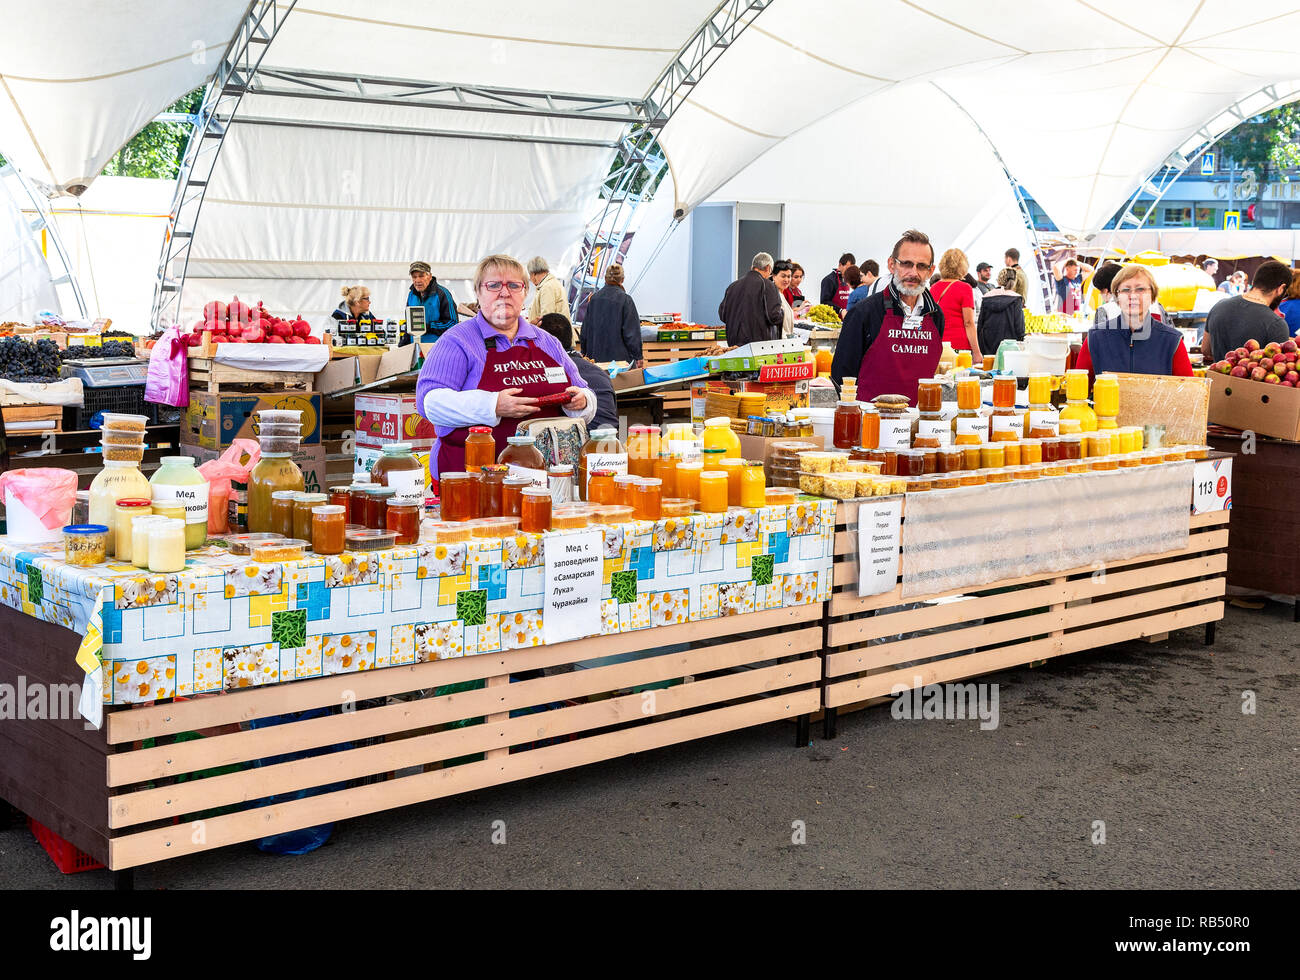 Samara, Russia - September 22, 2018: Sweet fresh honey and other produce selling at the traditional farmers market Stock Photo